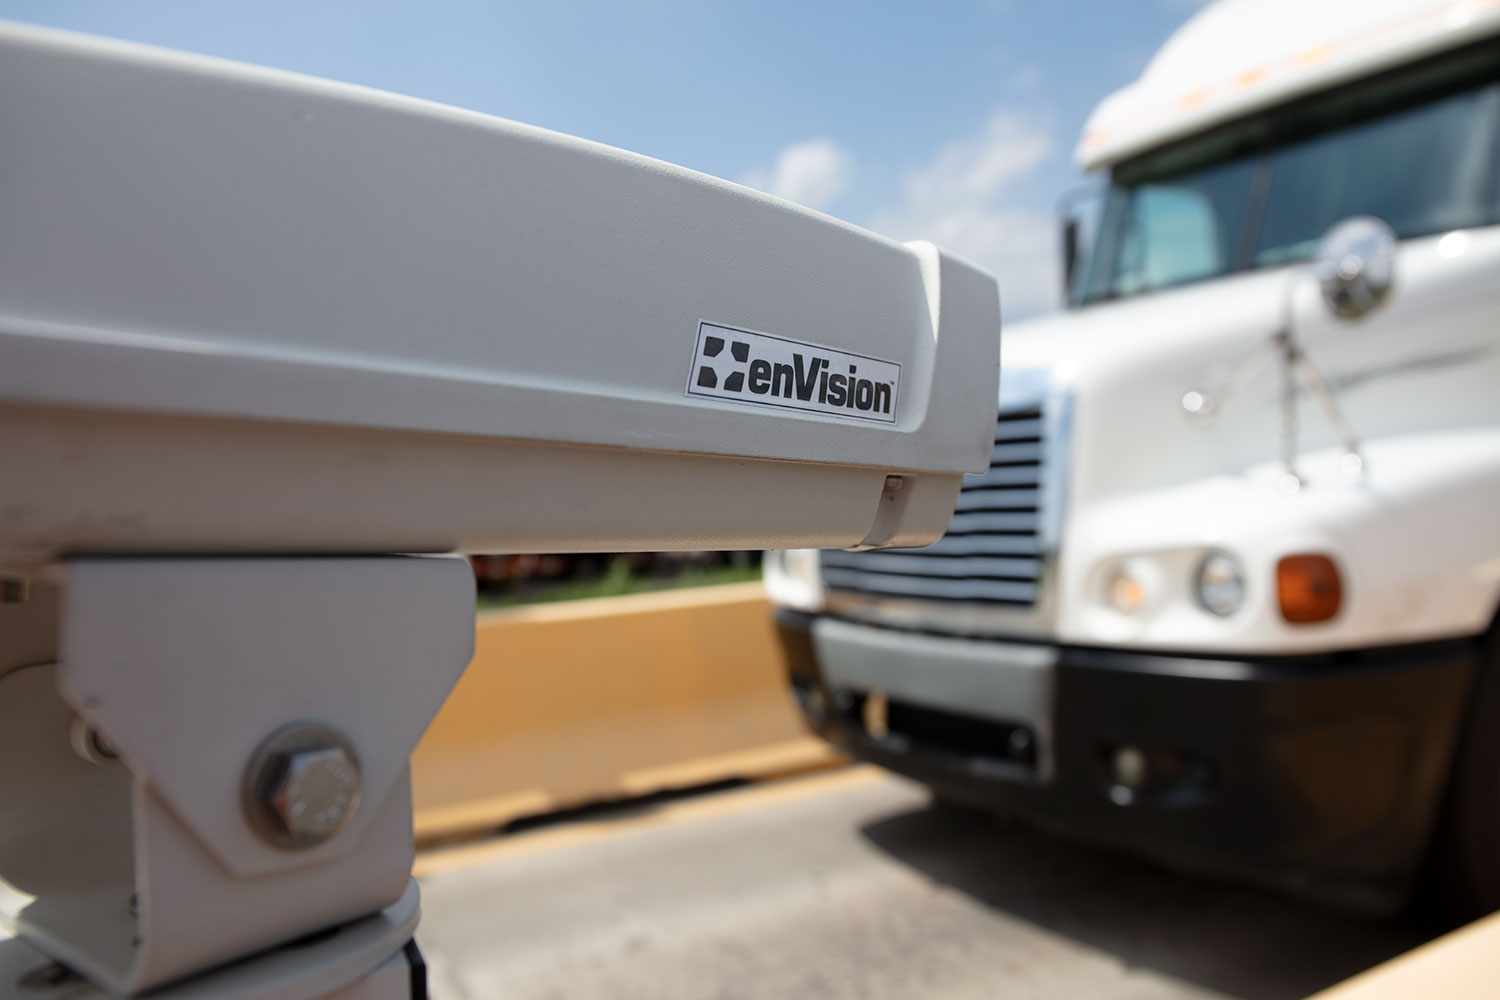 NASCENT’s enVision portal is a one-of-a-kind open-air, free-standing structure that can autonomously capture truck & container data in real-time to help improve security protocols & procedures.